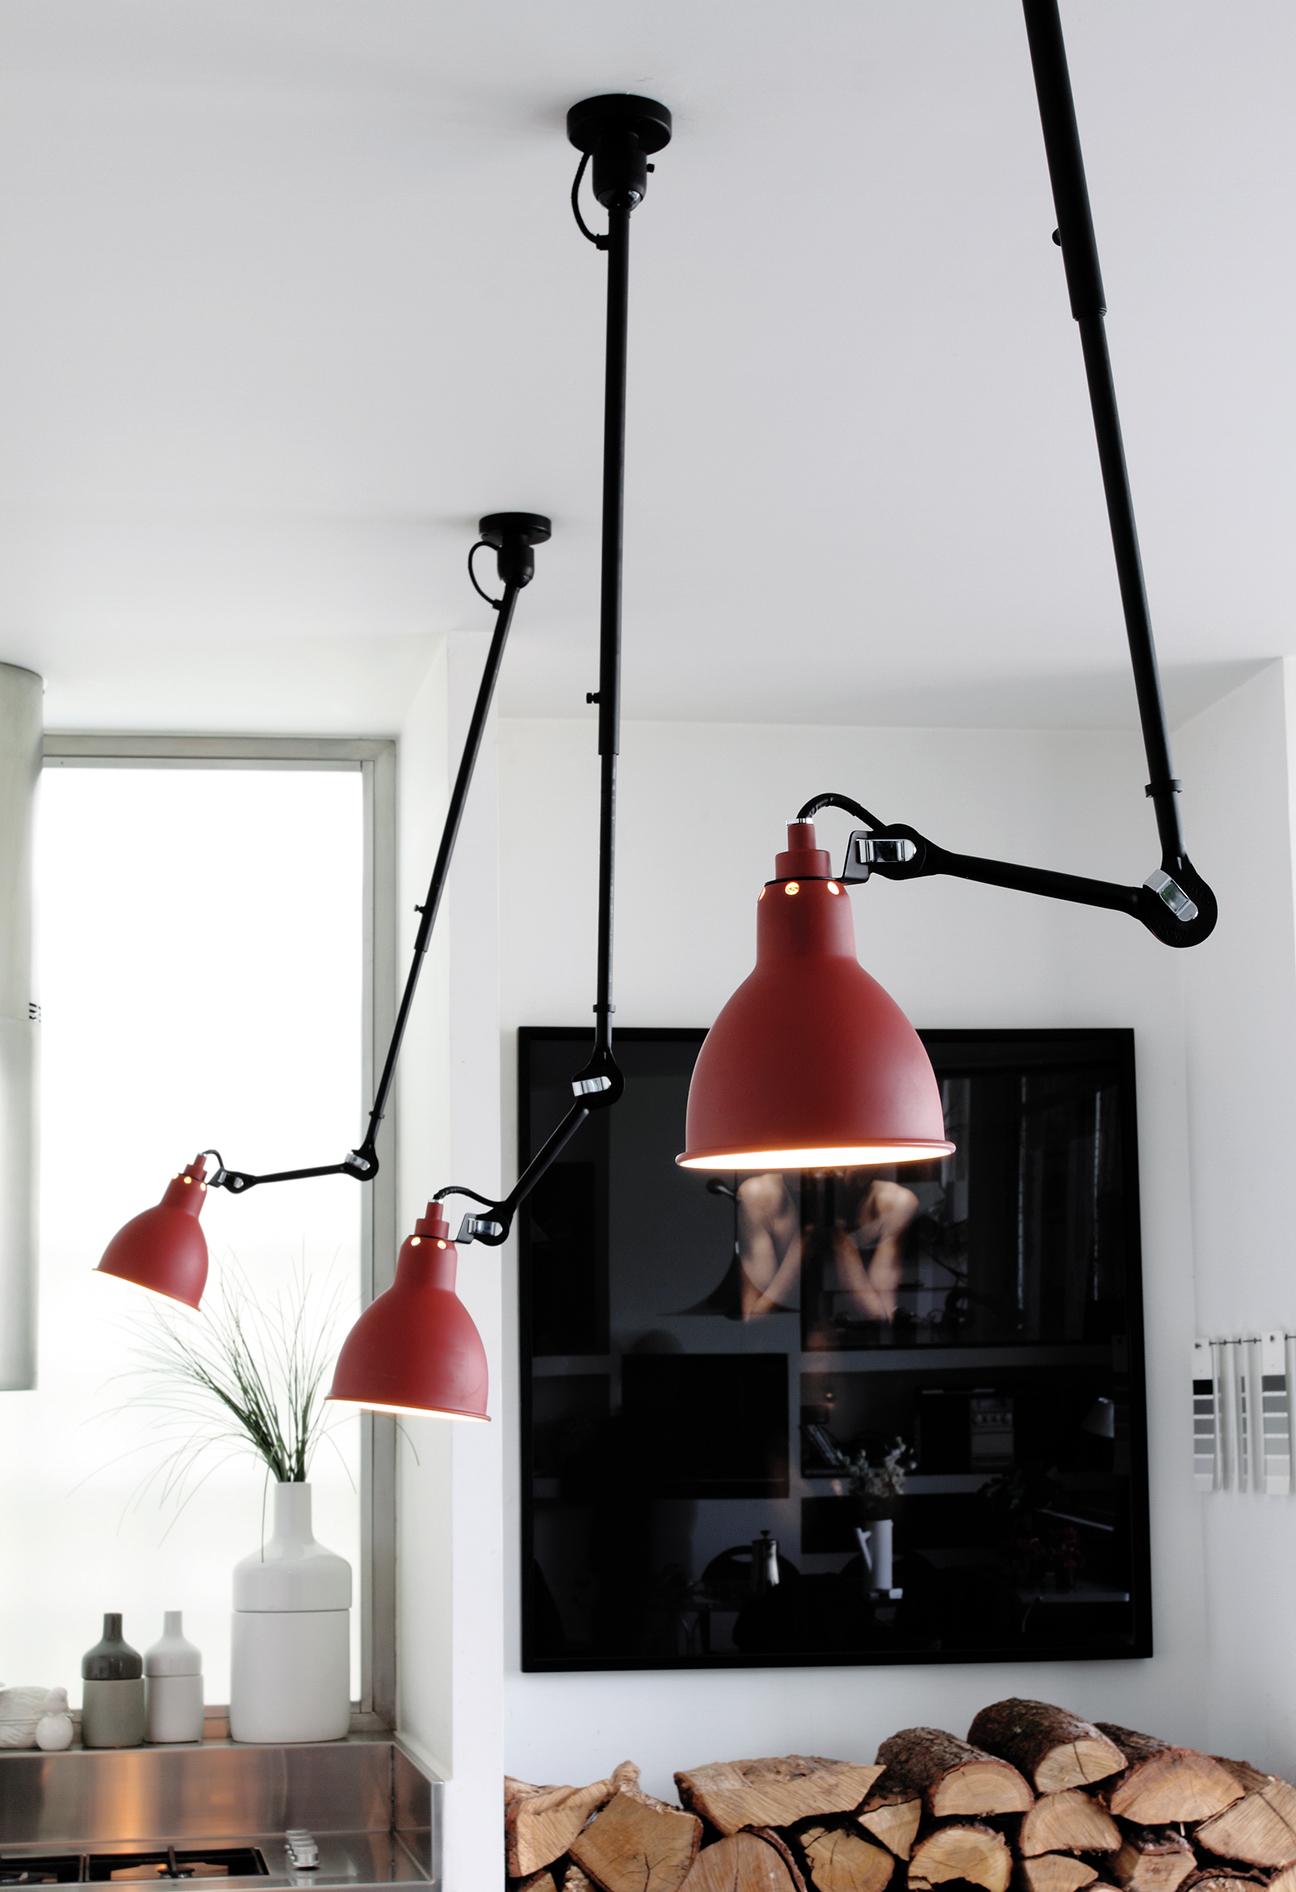 Steel DCW Editions La Lampe Gras N°302 Pendant Light in Black Arm and Yellow Shade For Sale